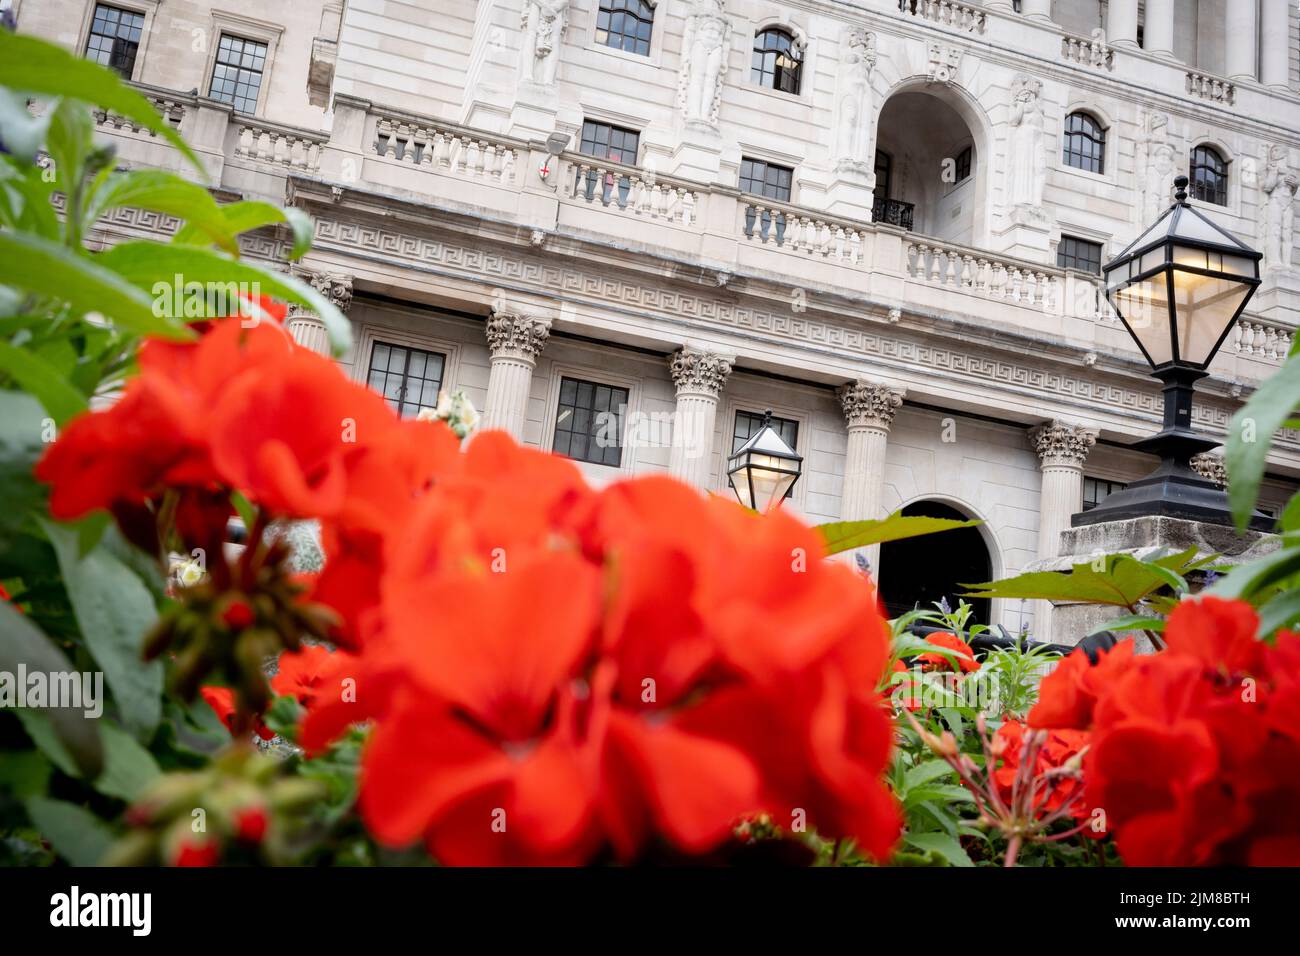 On the day that the Bank of England announced a rise, from 1.25% to 1.75% in the interest rate, the highest increase in 27 years, are flowers and an exterior of the Bank of England, on 4th August 2022, in the City of London, England. This increase is widely seen as a slide towards inflation with a shrinking of the UK economy - the start of its fall into recession in the third financial quarter of 2022. Stock Photo